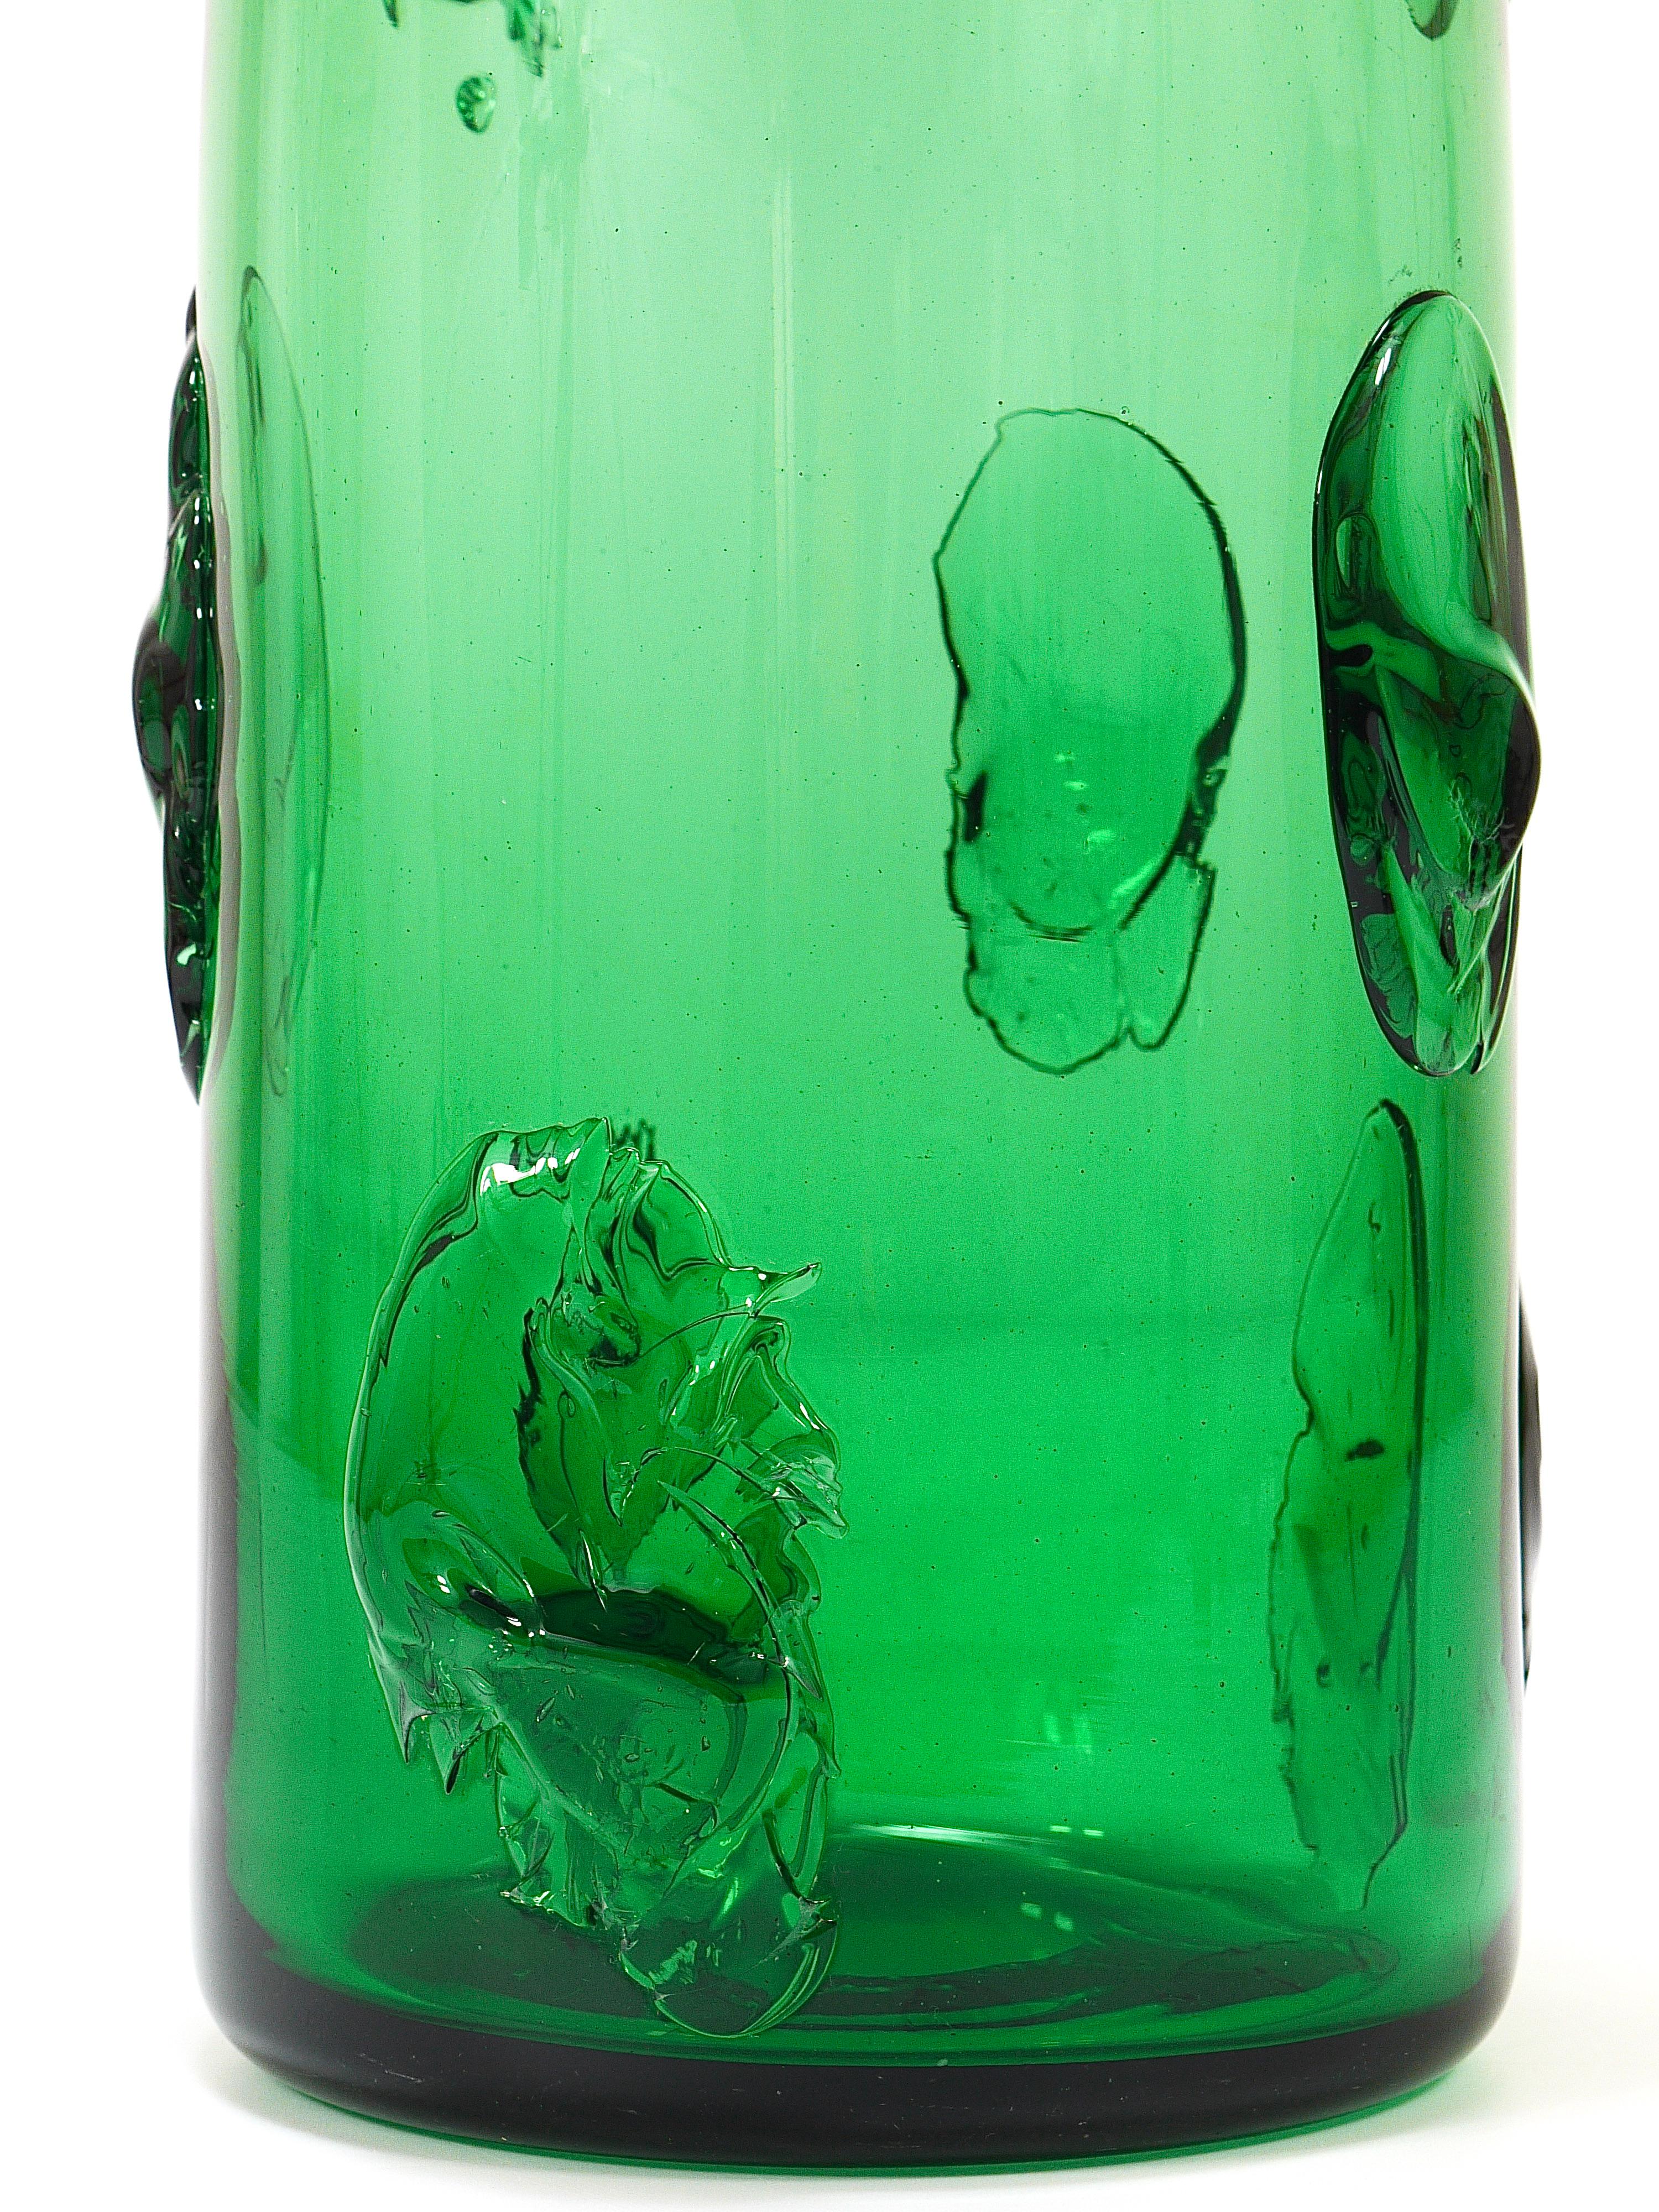 A beautiful and large Italian Vetrerie di Empoli vase from the 1960s, hand-blown from thick vibrant emerald green glass. The vase has a round base and a square top and hot-applied decoration to its surface. It is 12 1/2 inches high and has a